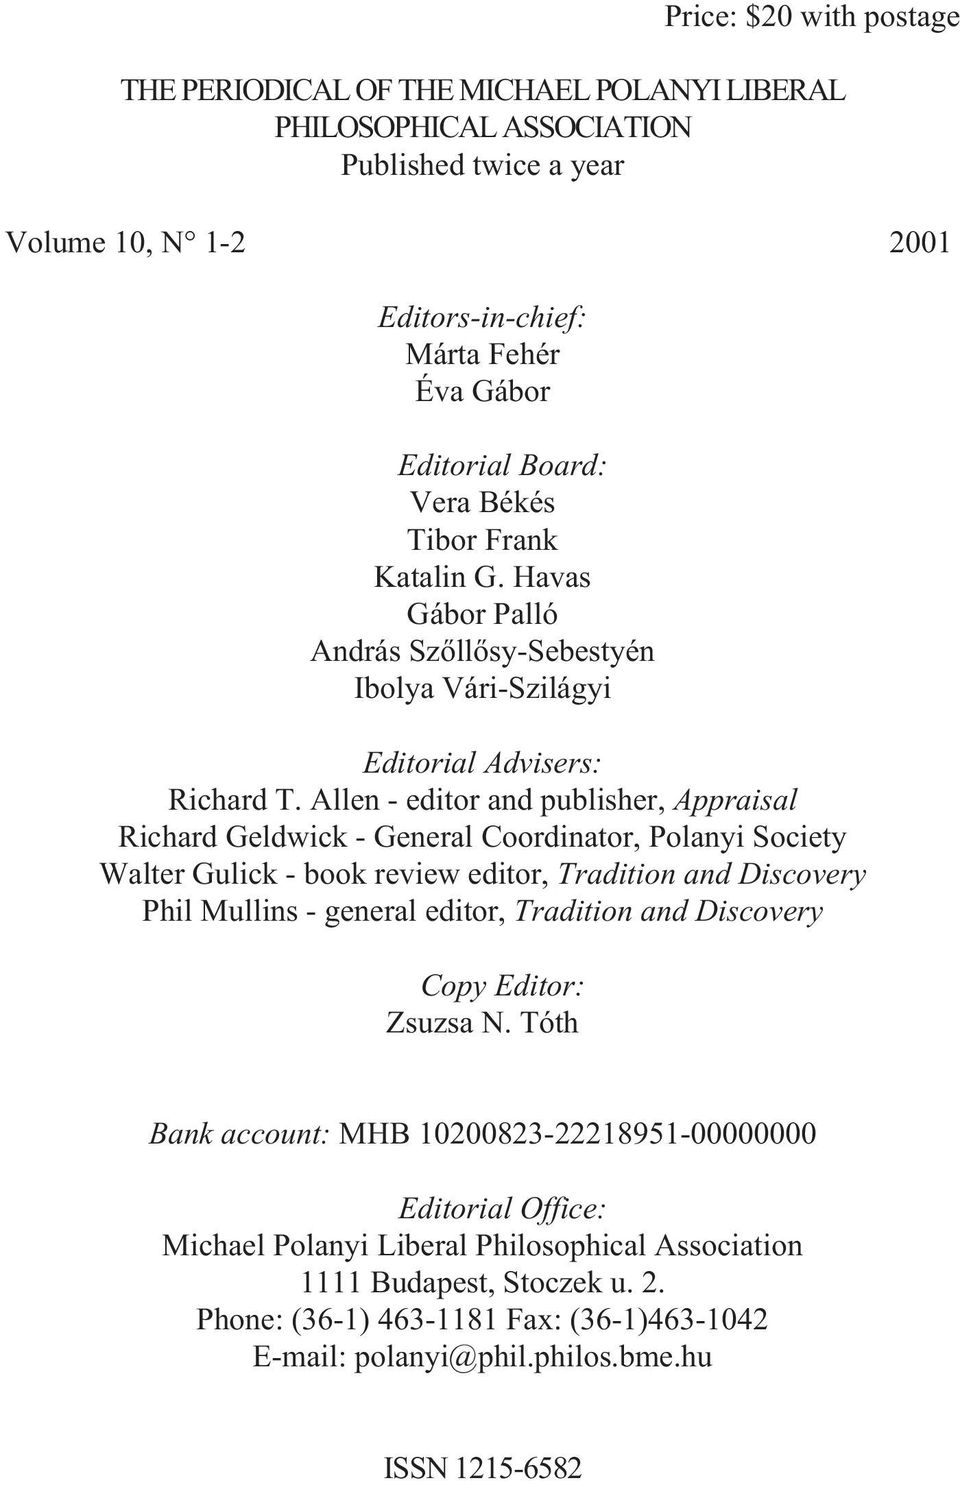 Allen - editor and publisher, Appraisal Richard Geldwick - General Coordinator, Polanyi Society Walter Gulick - book review editor, Tradition and Discovery Phil Mullins - general editor, Tradition